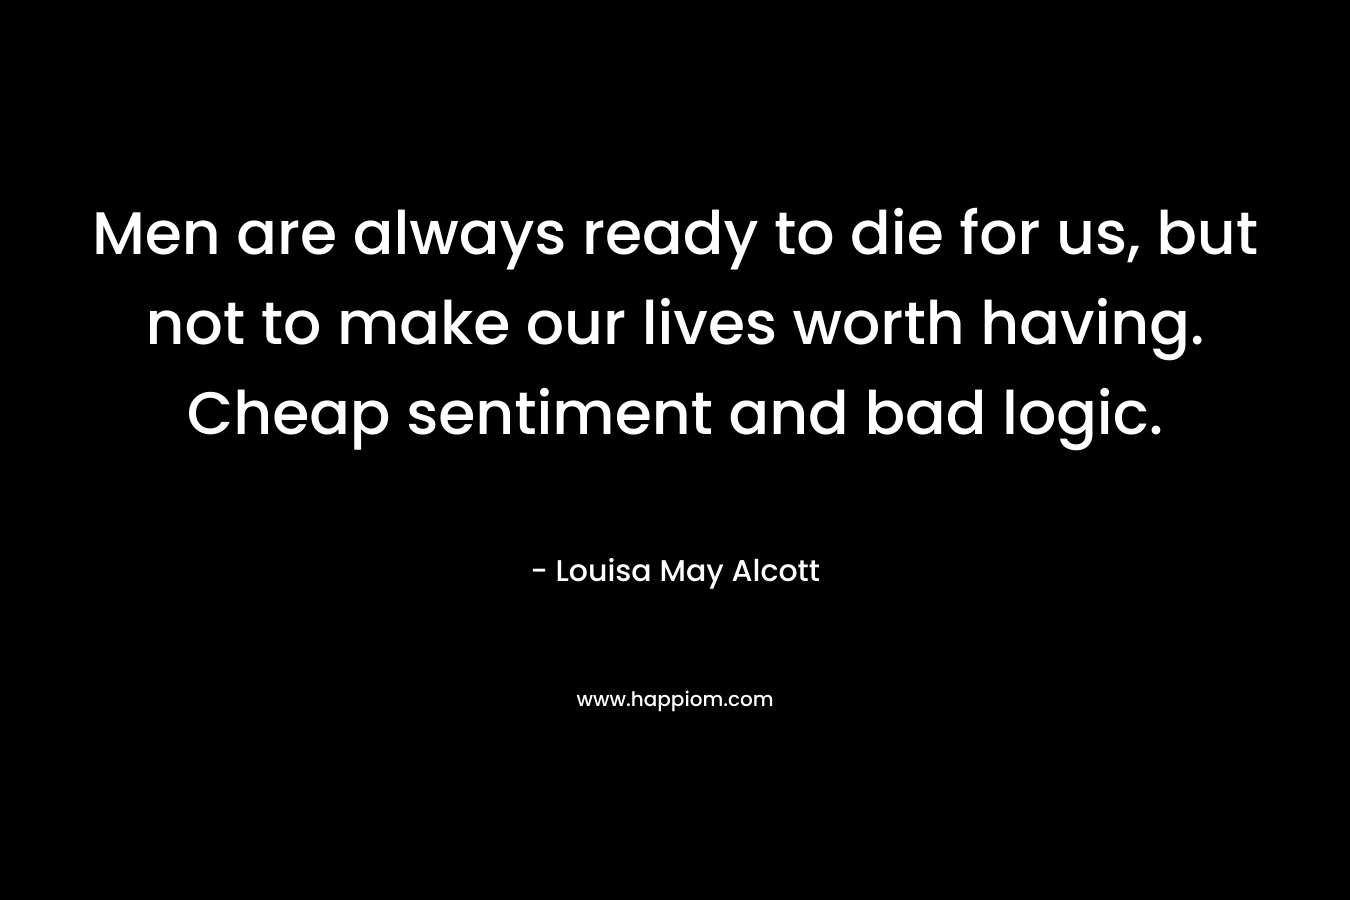 Men are always ready to die for us, but not to make our lives worth having. Cheap sentiment and bad logic.